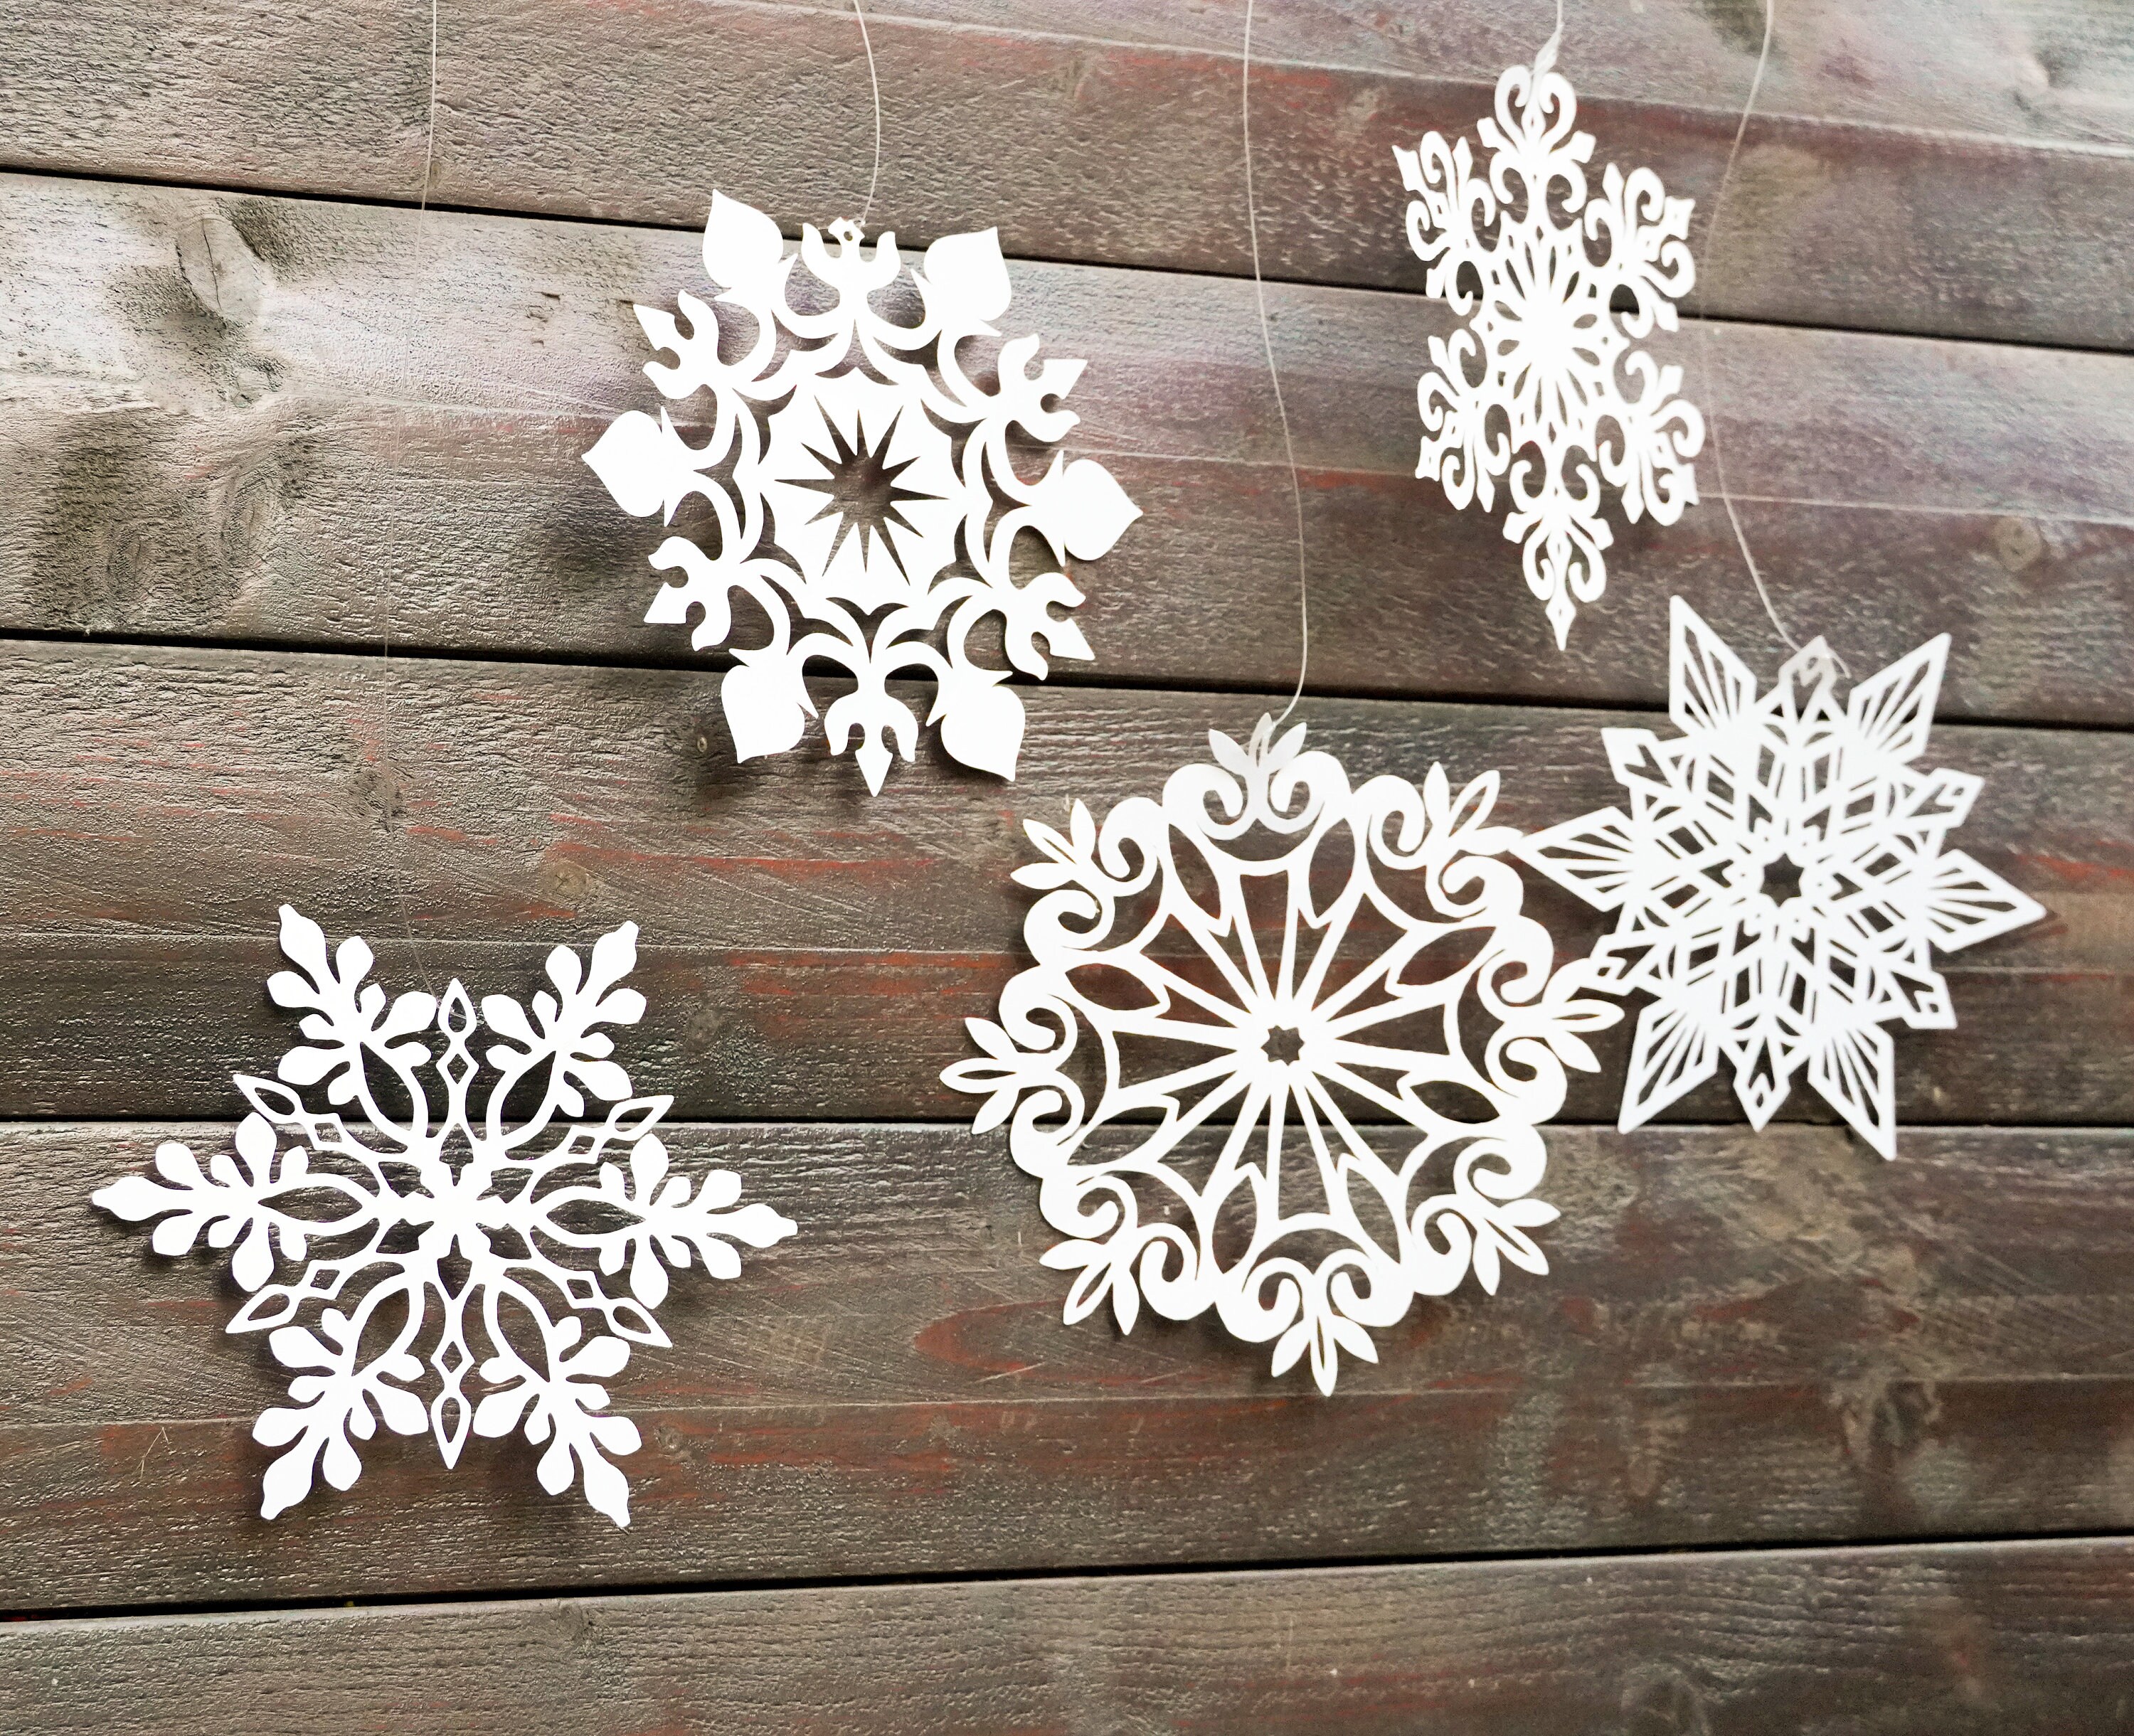  24 Pcs Christmas Hanging Snowflake Decorations 12 pcs 3D Large  Silver Snowflake Ornaments & White Paper Snowflake Garland for Christmas  Winter Wonderland Decorations Frozen Birthday Party Supplies : Home &  Kitchen